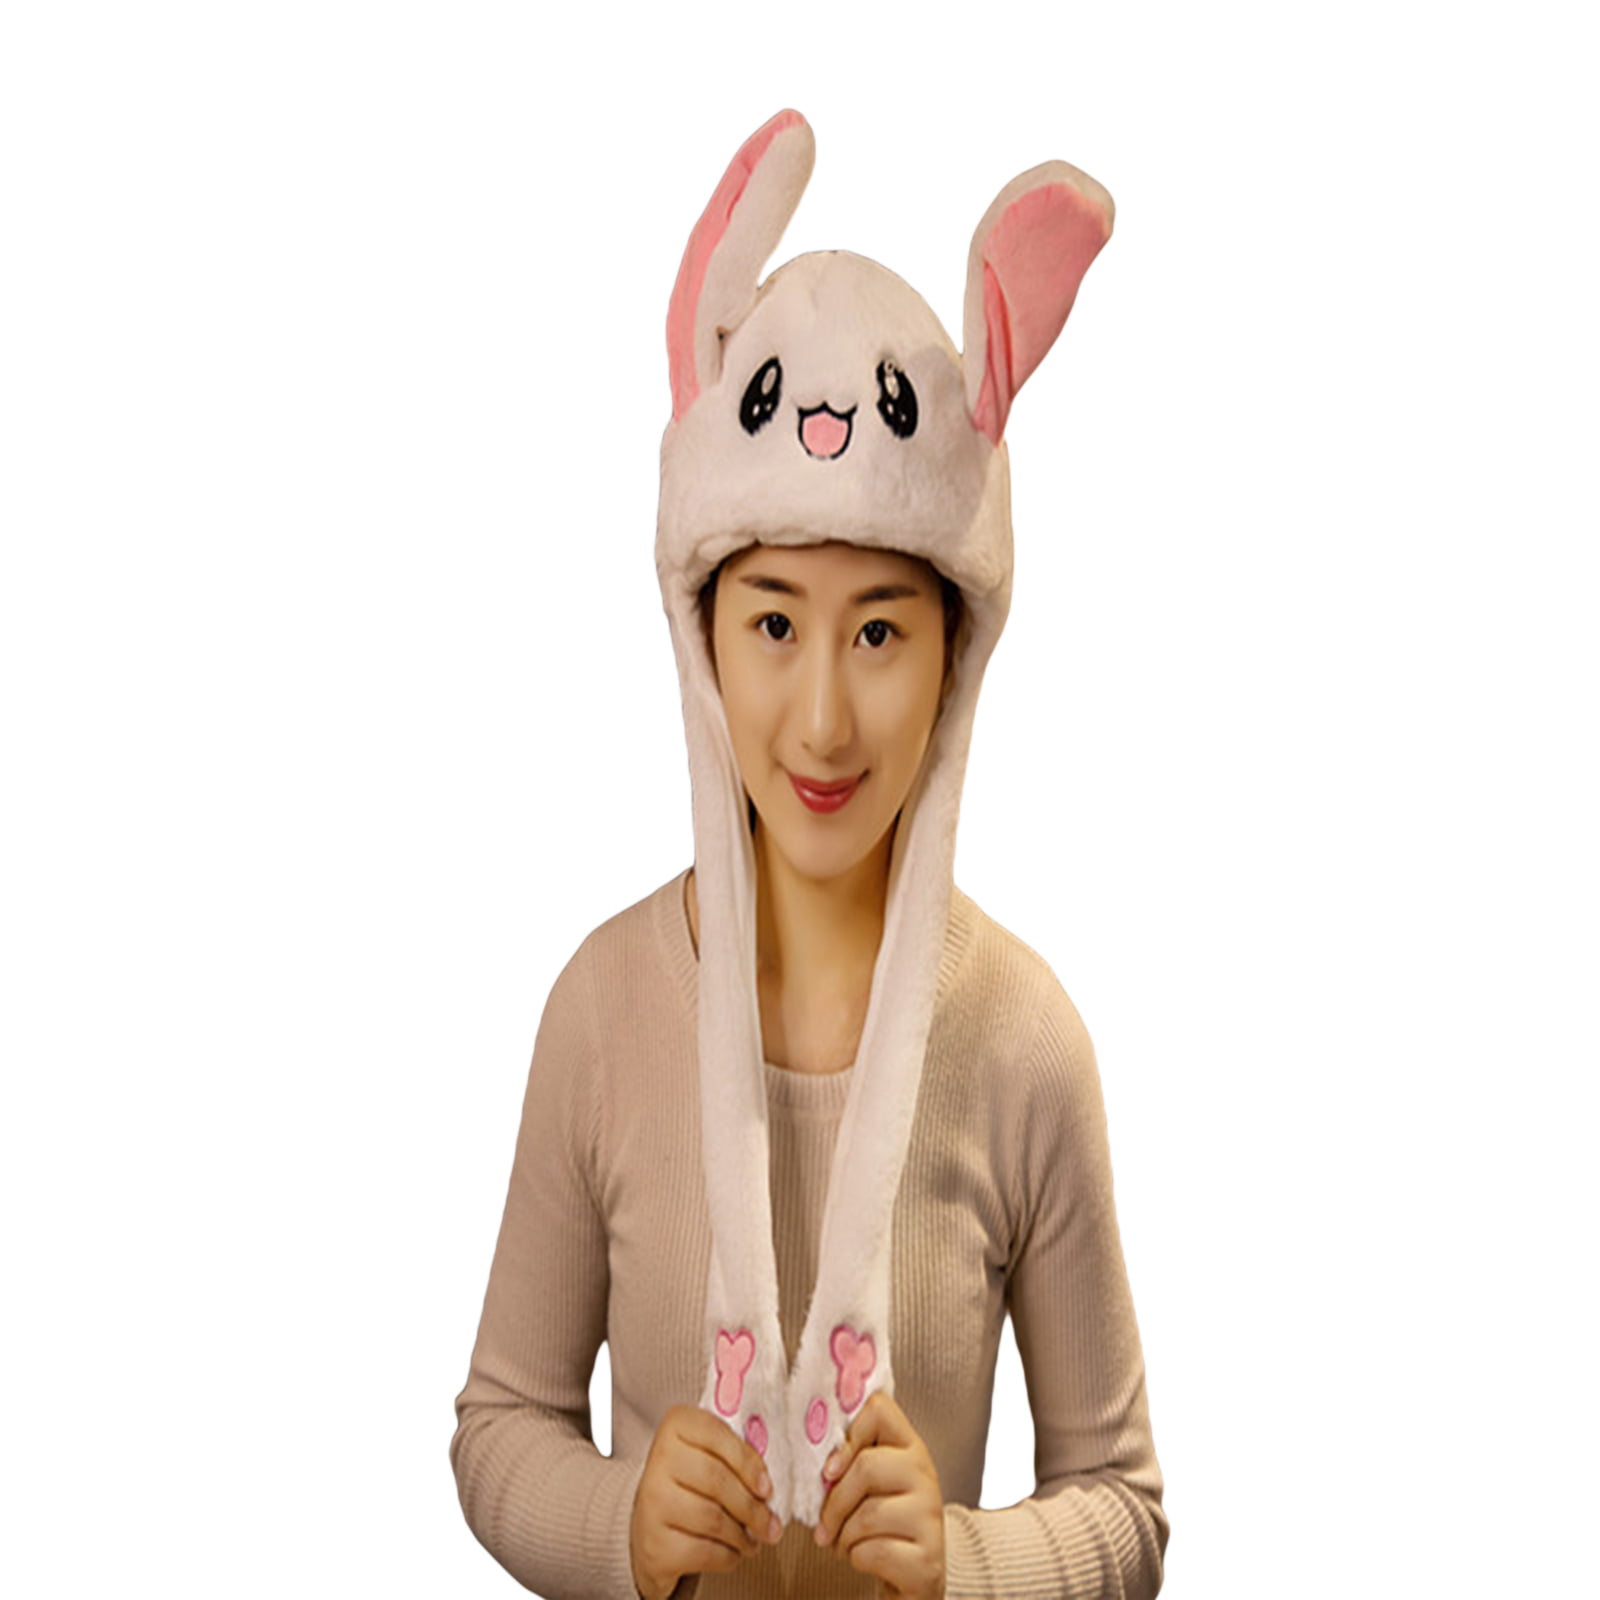 Bunny Hat Funny Plush Bunny Hats Ear Moving Jumping Hat Rabbit Hat Kids Adult Christmas Party Cosplay Cute Animal Hats